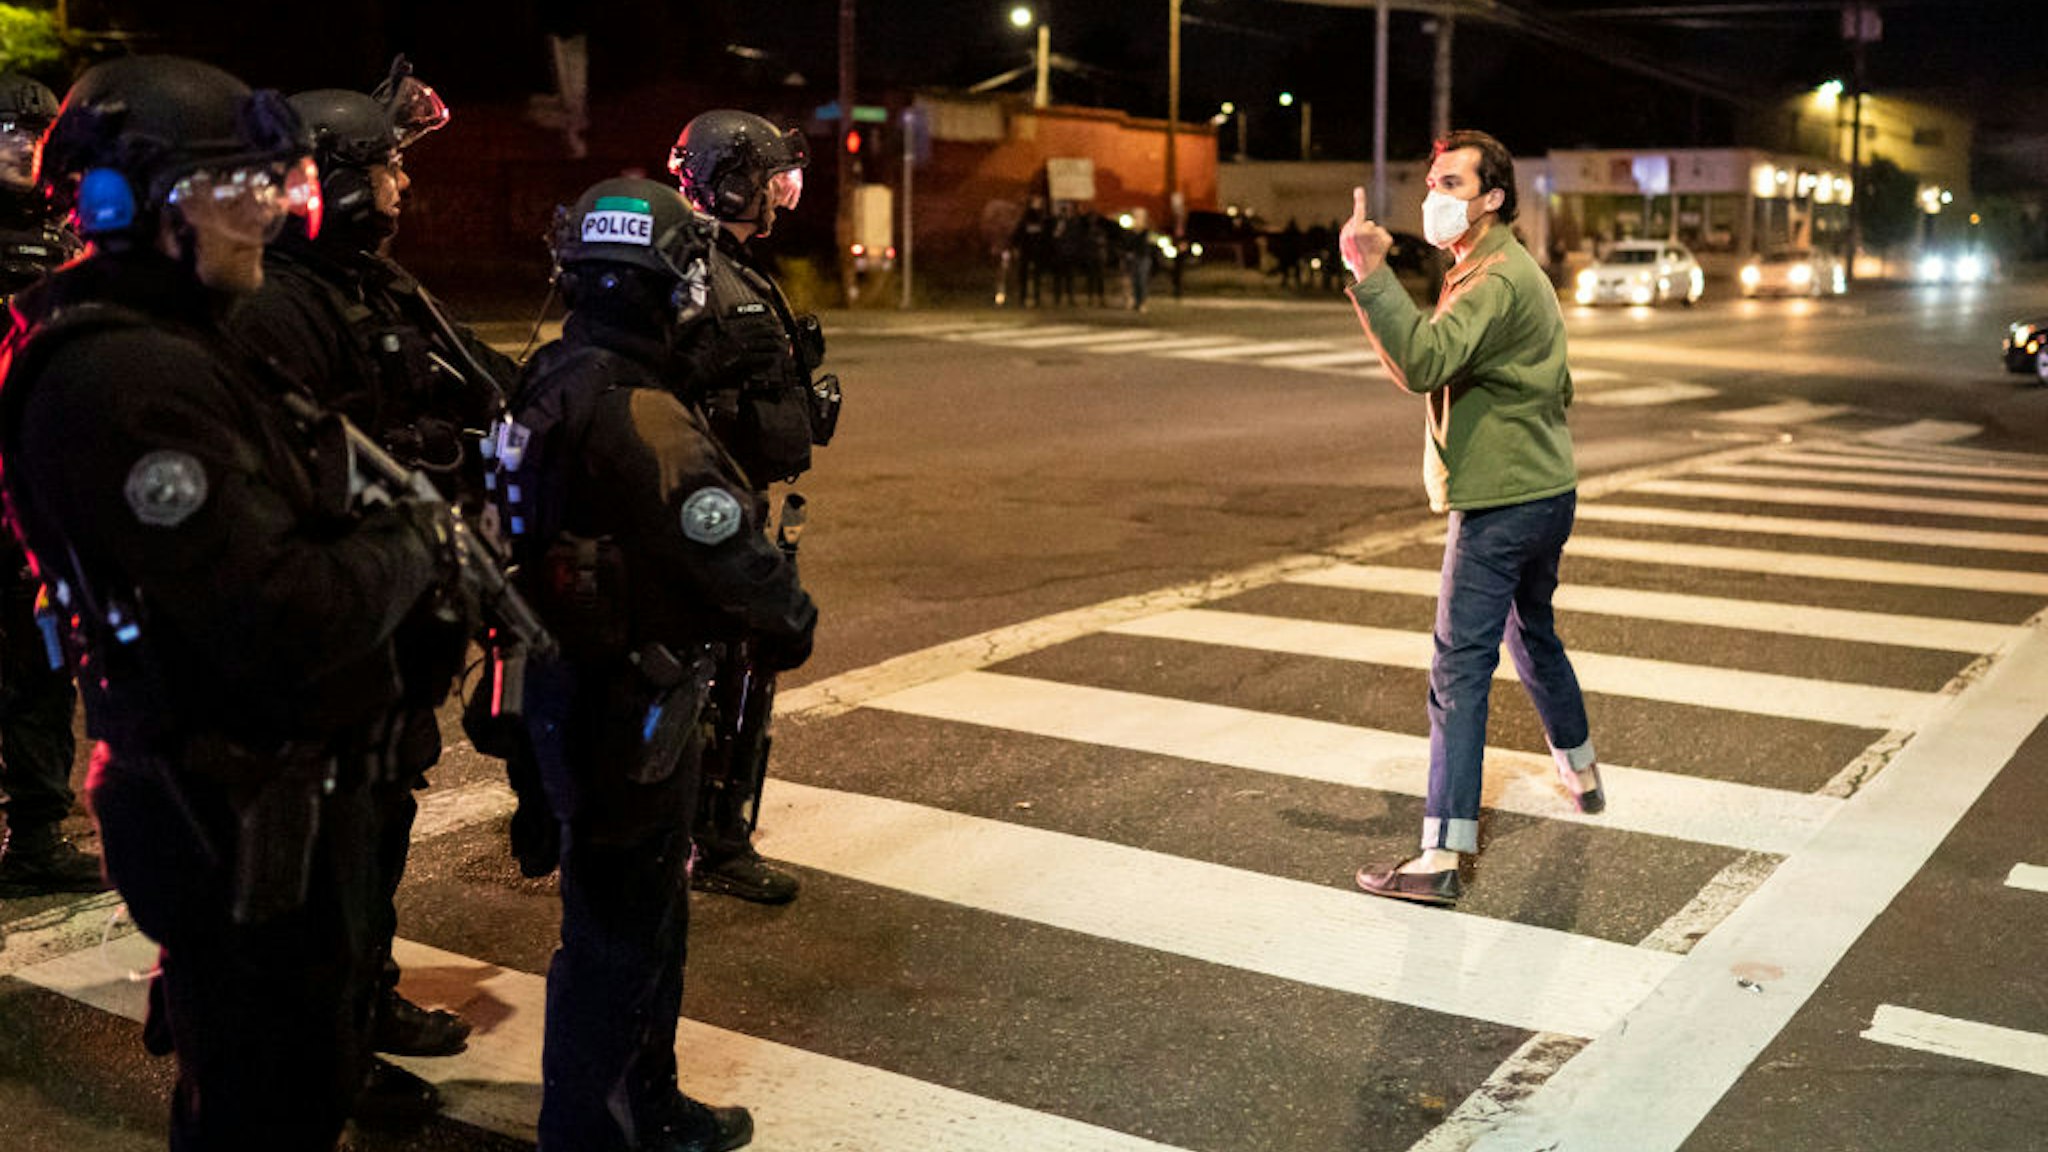 A protester makes a hand gesture toward Portland police officers after they dispersed a crowd from in front of the Portland Police Association (PPA) building early in the morning on August 29, 2020 in Portland, Oregon.